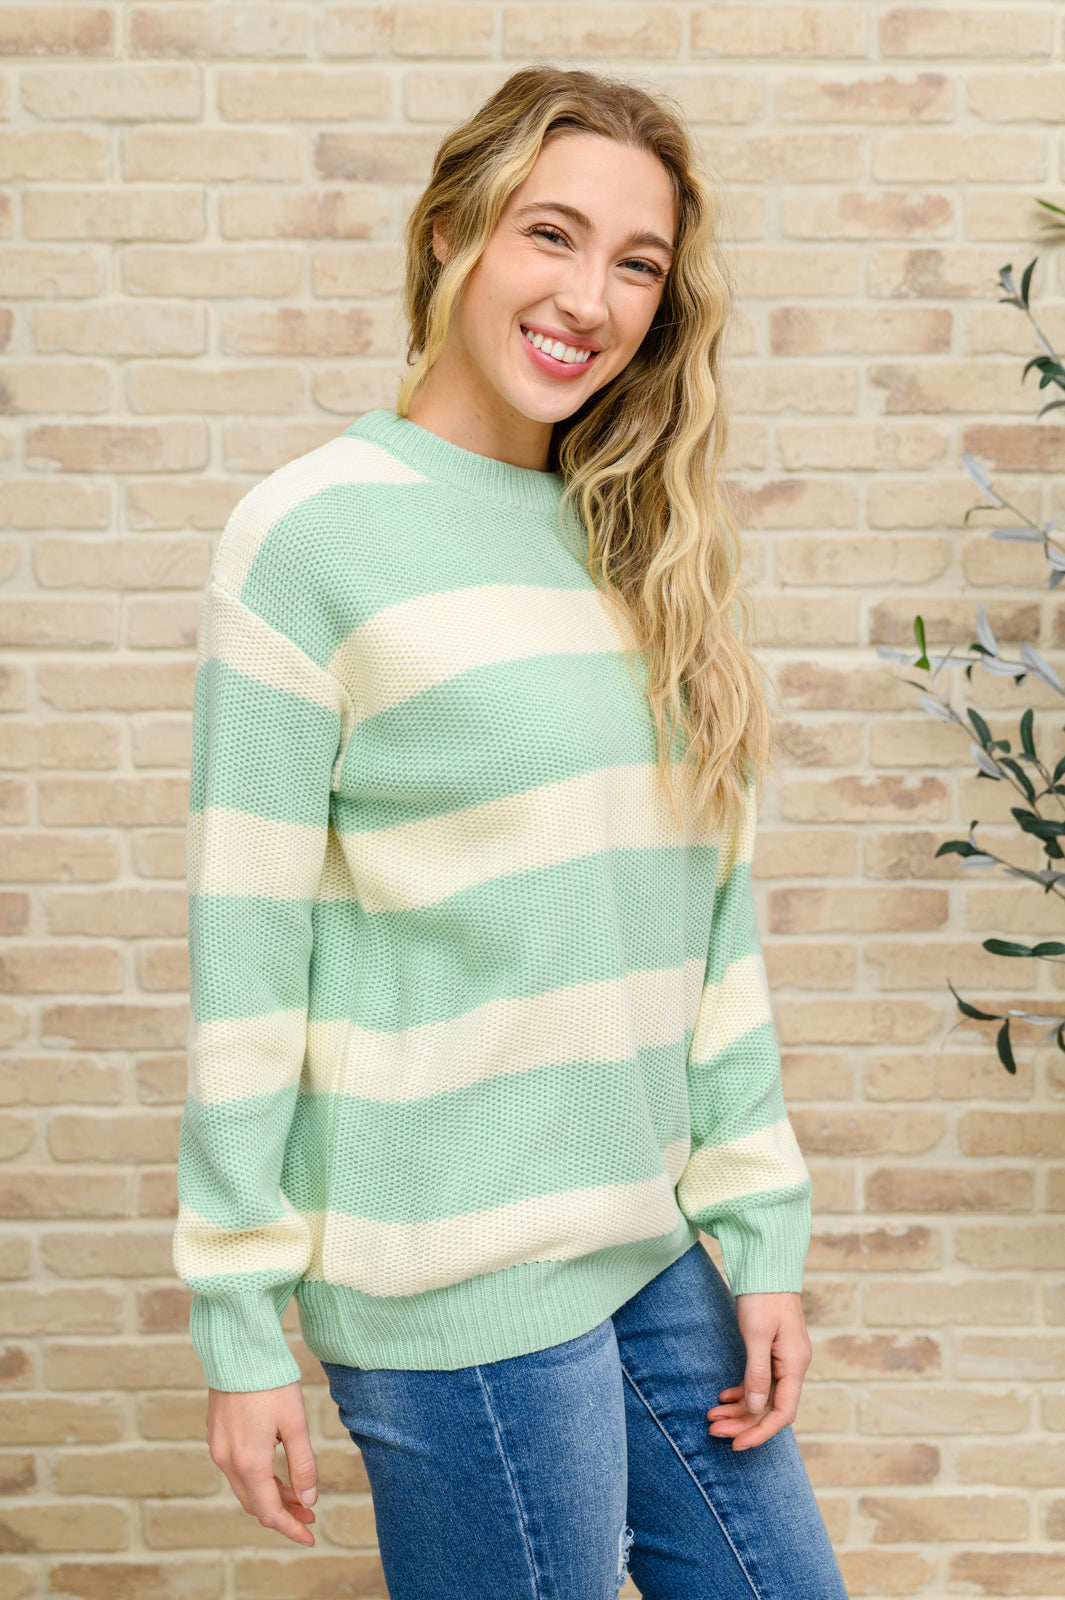 Striped Top In Sage - 11/21/2022